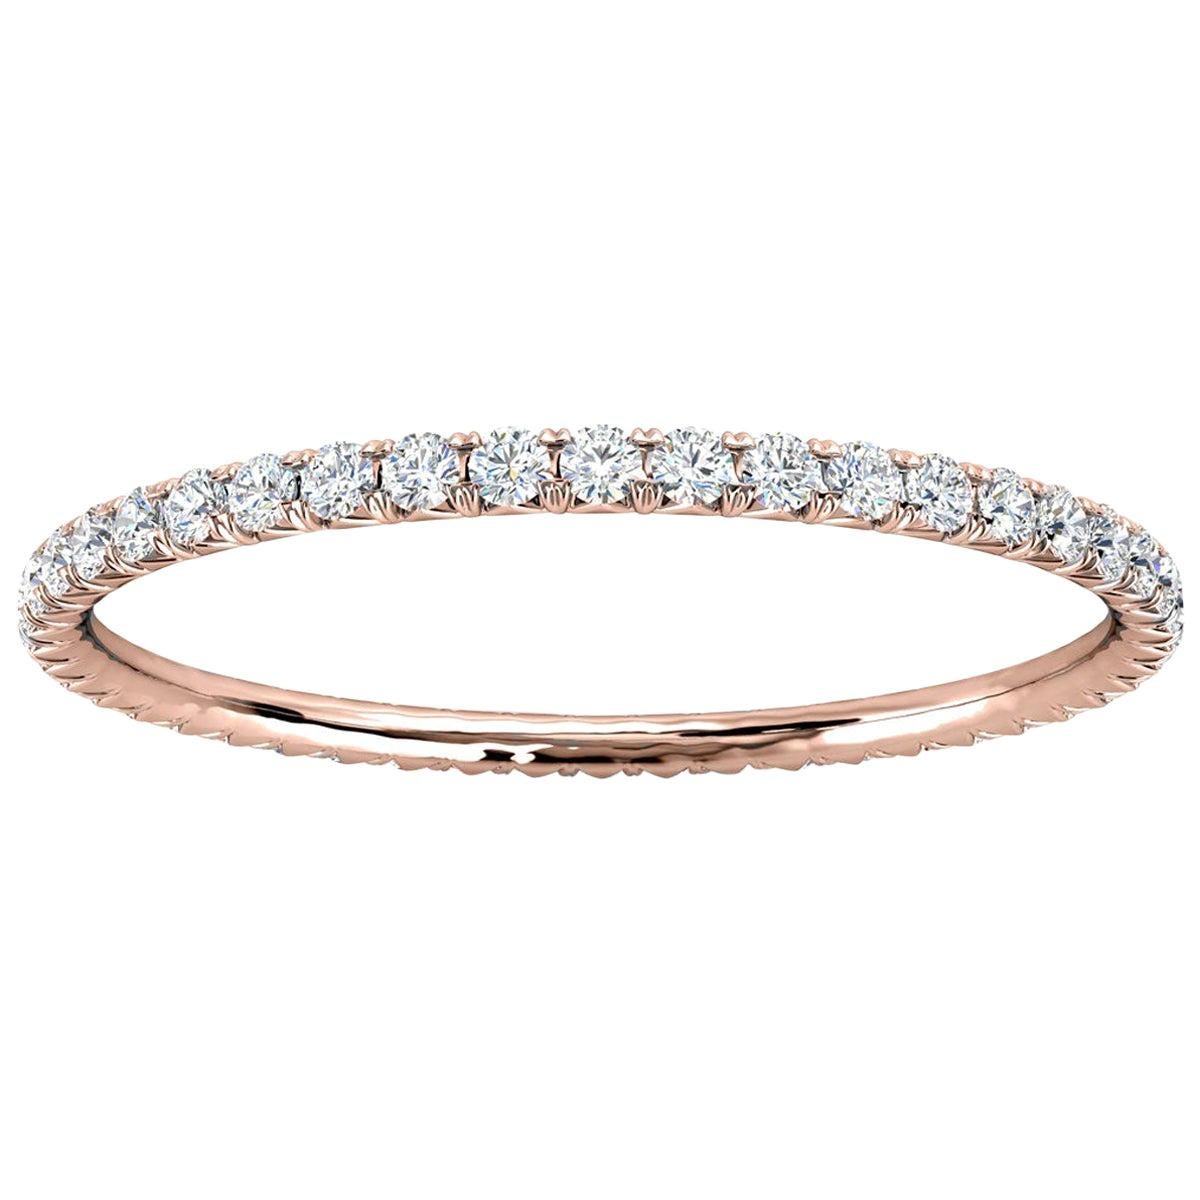 For Sale:  18k Rose Gold Mia Petite French Pave Diamond Eternity Ring '1/4 Ct. Tw'